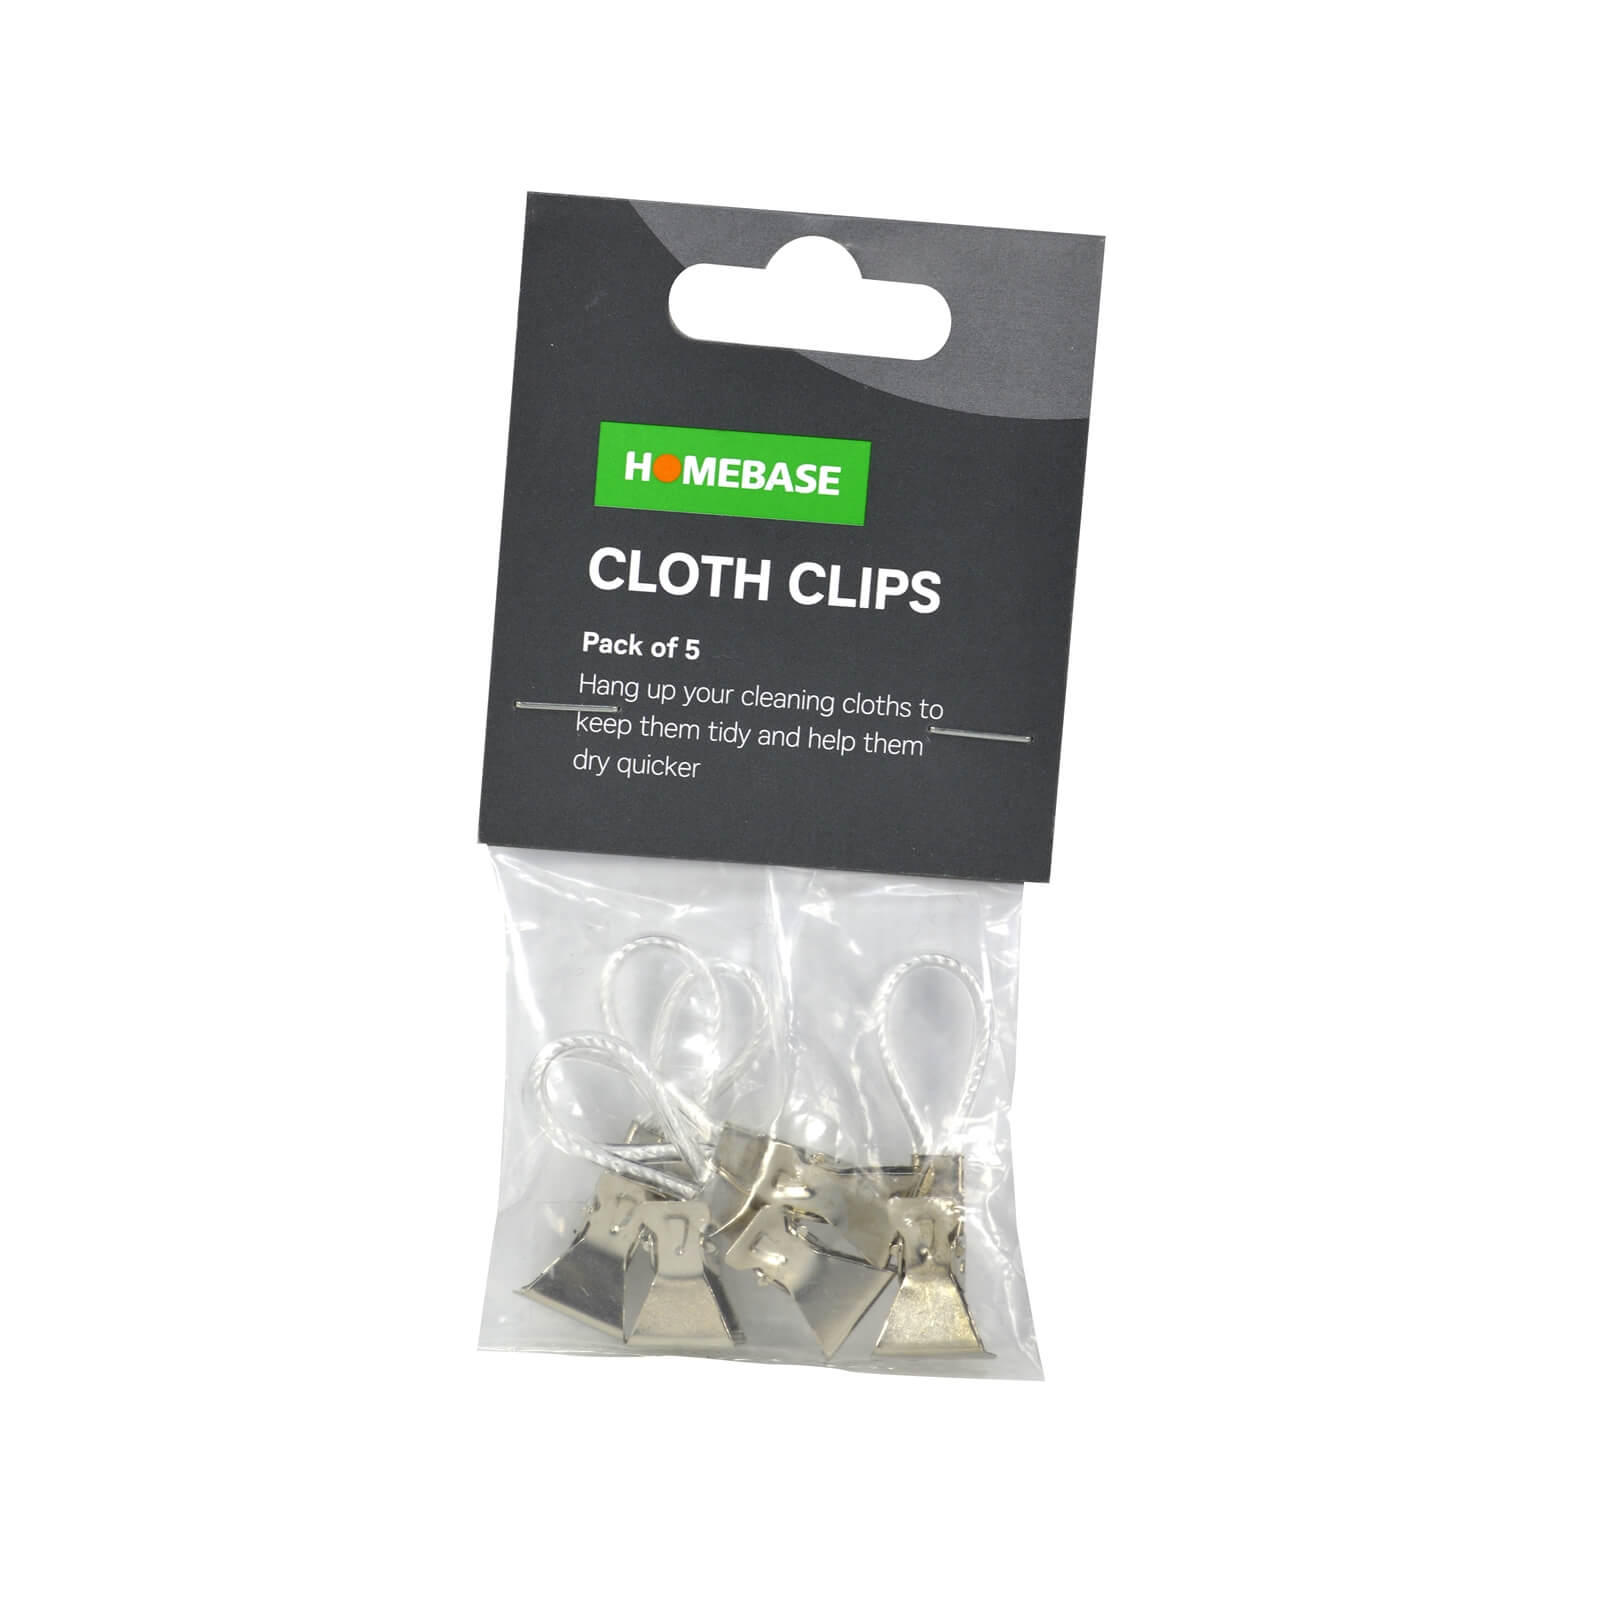 5 pack of Cloth Clips